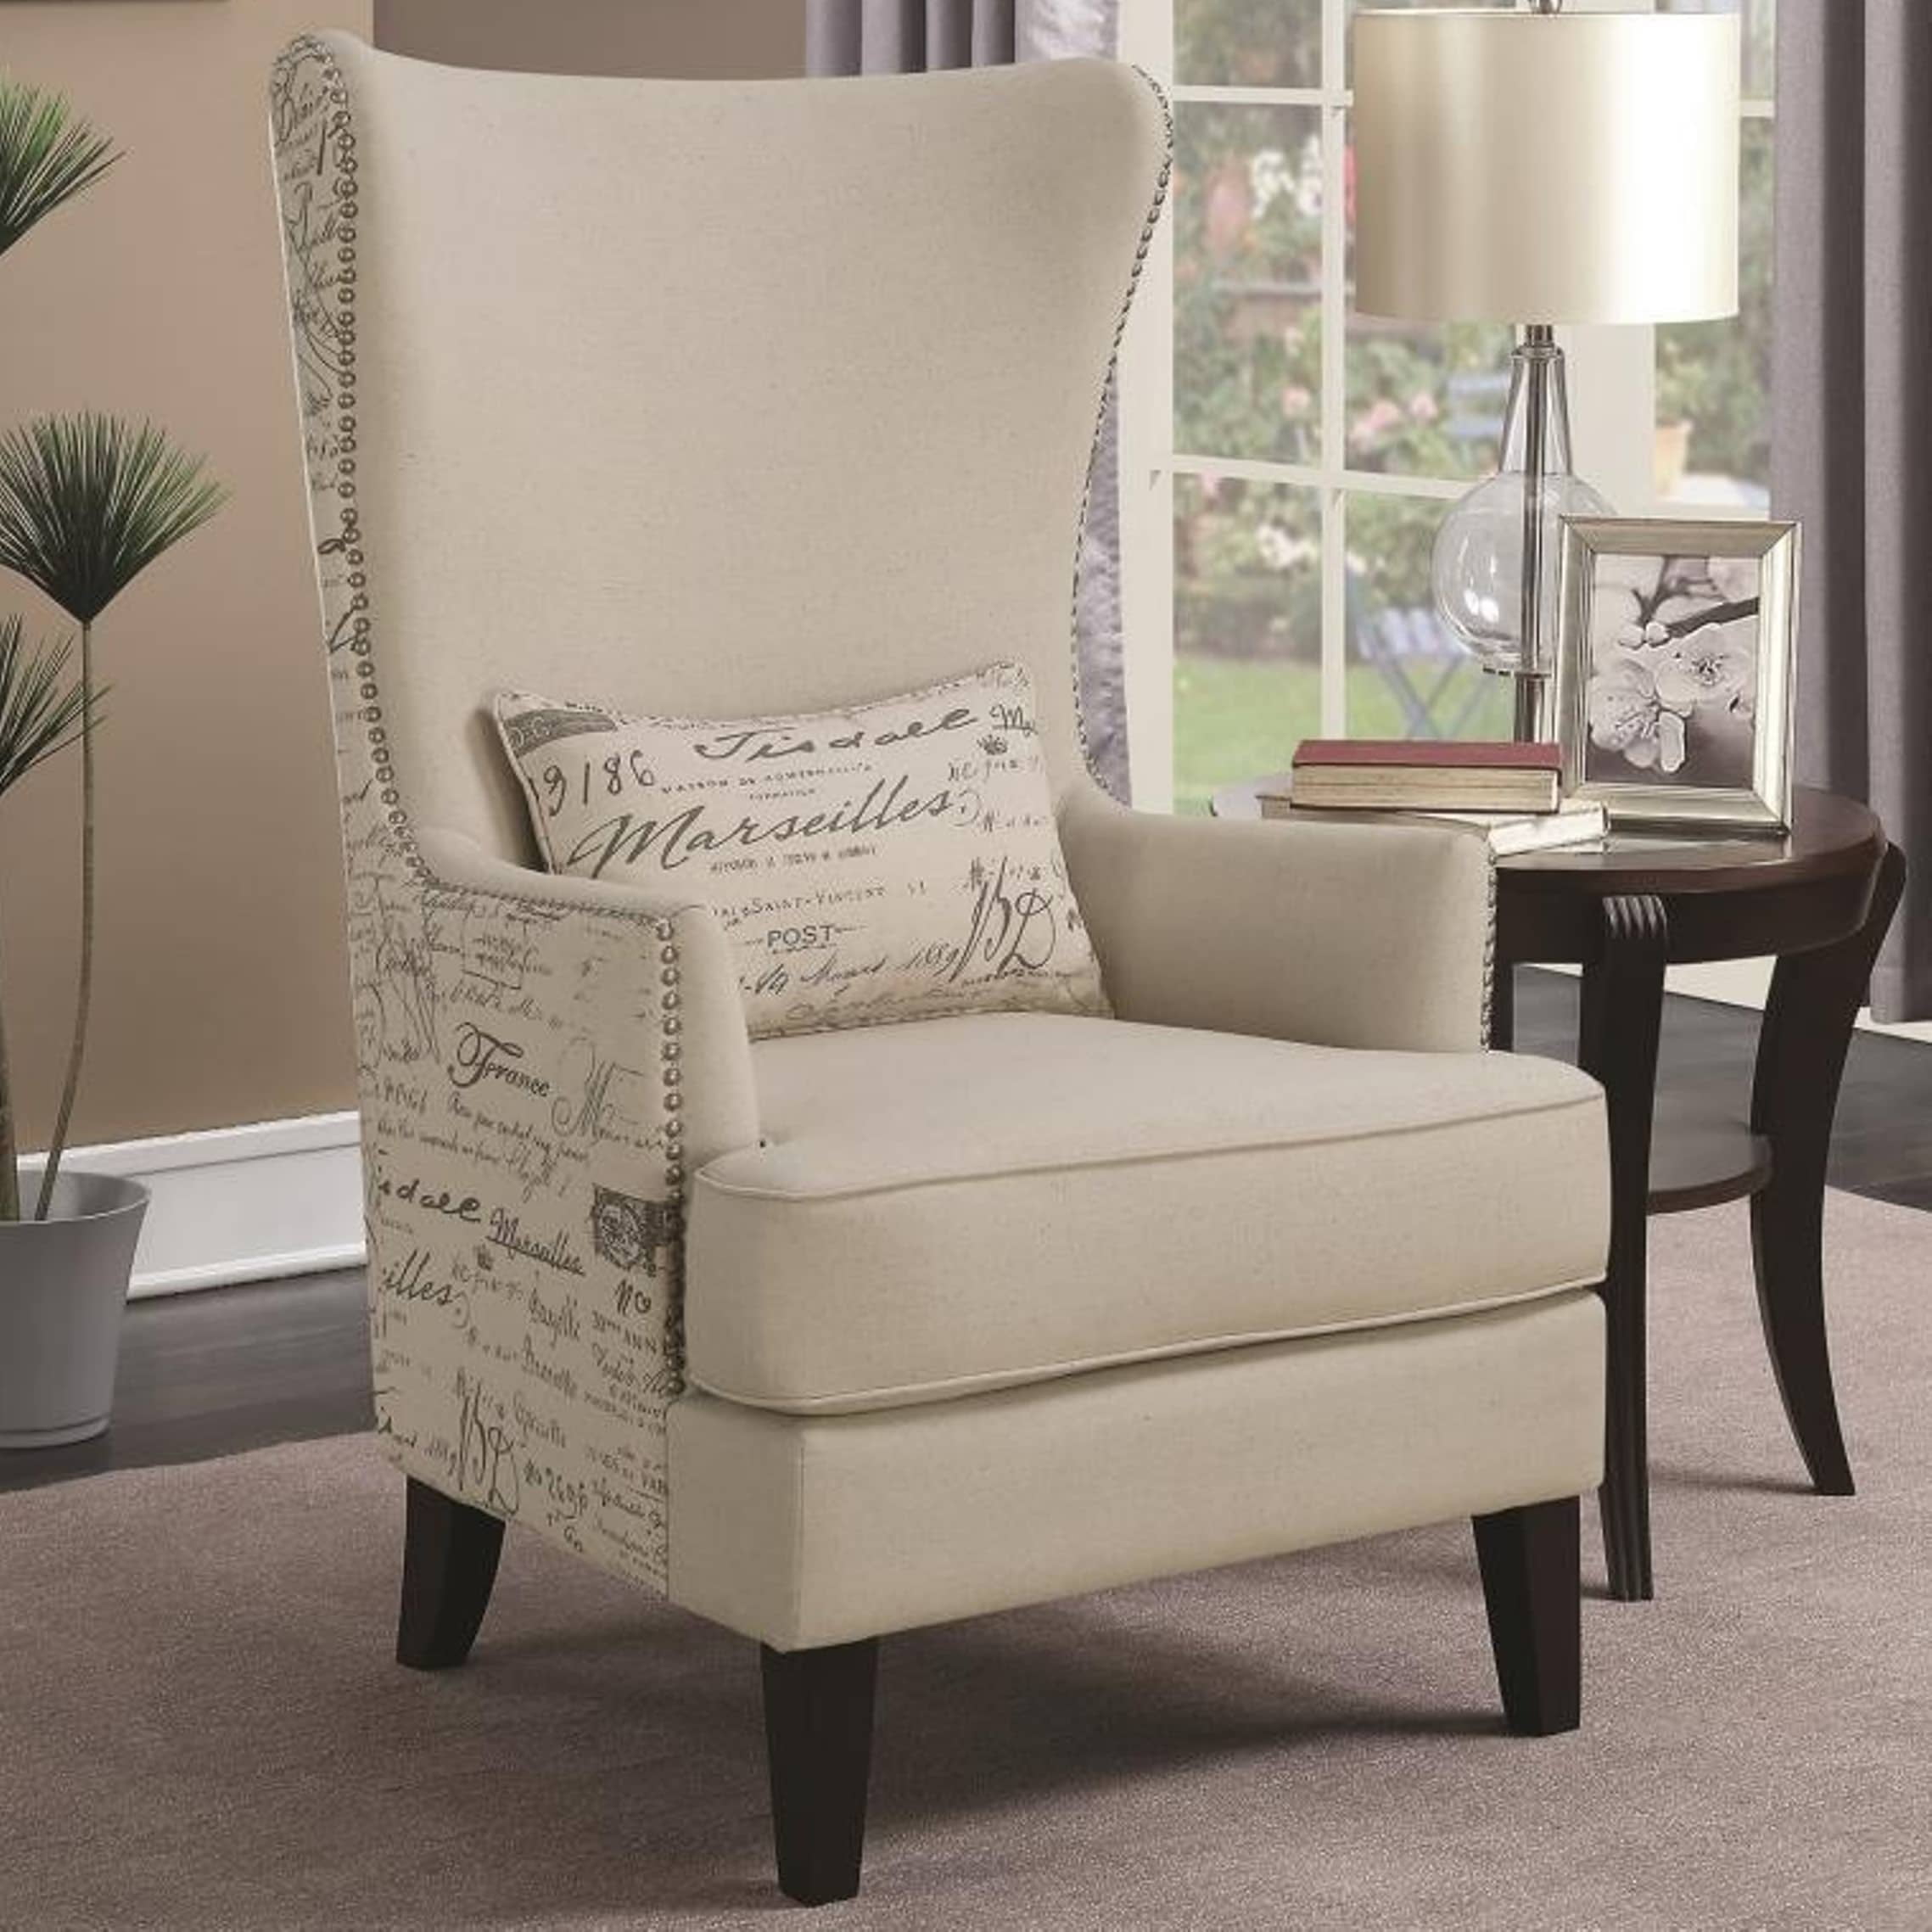 Modern French Script Design Curved High Back Accent Chair - Walmart.com